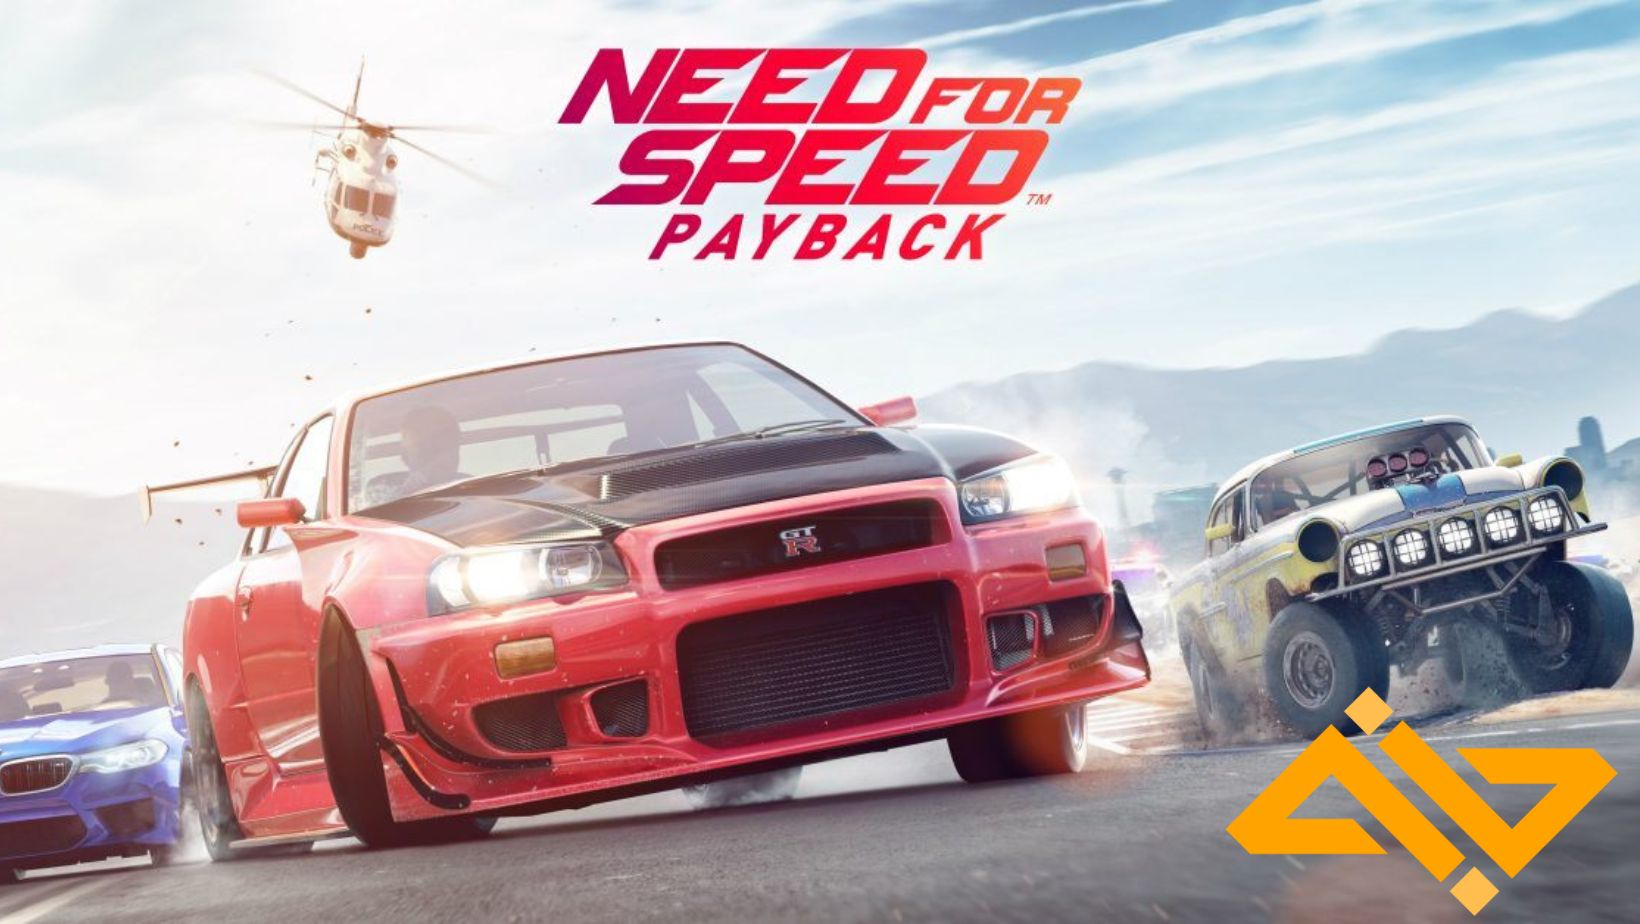 On paper, the game has all the ingredients to be one of the best NFS games of all time. 